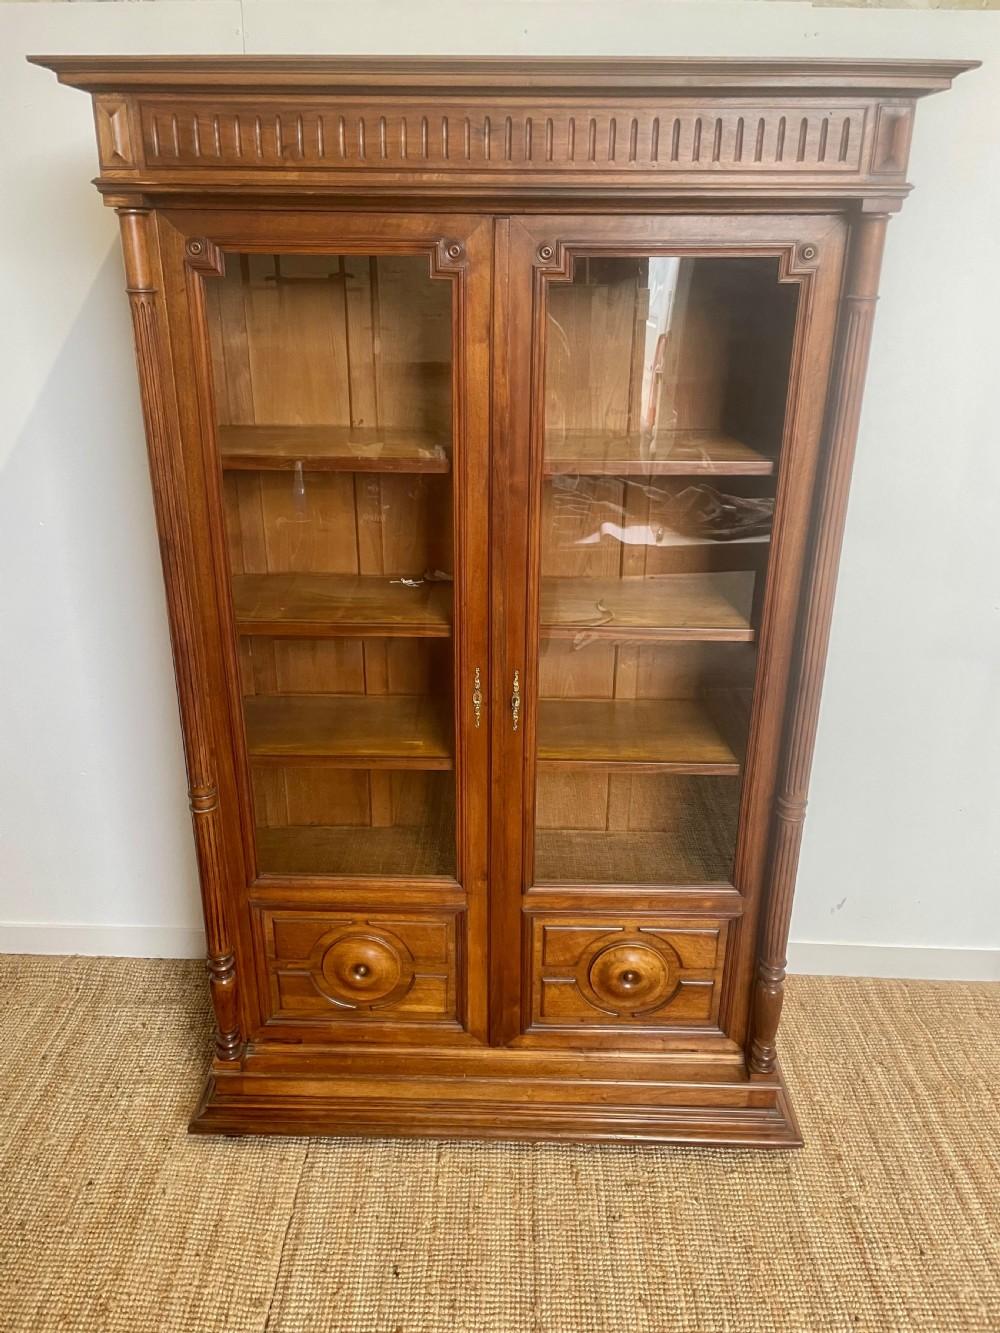 Very good quality late 19th century solid walnut 2 door bookcase
French circa 1880's with 4 fully adjustable shelves ( we have made new plywood shelves lipped with walnut ) the beauty of this piece is that it can flat pack for ease of transportation